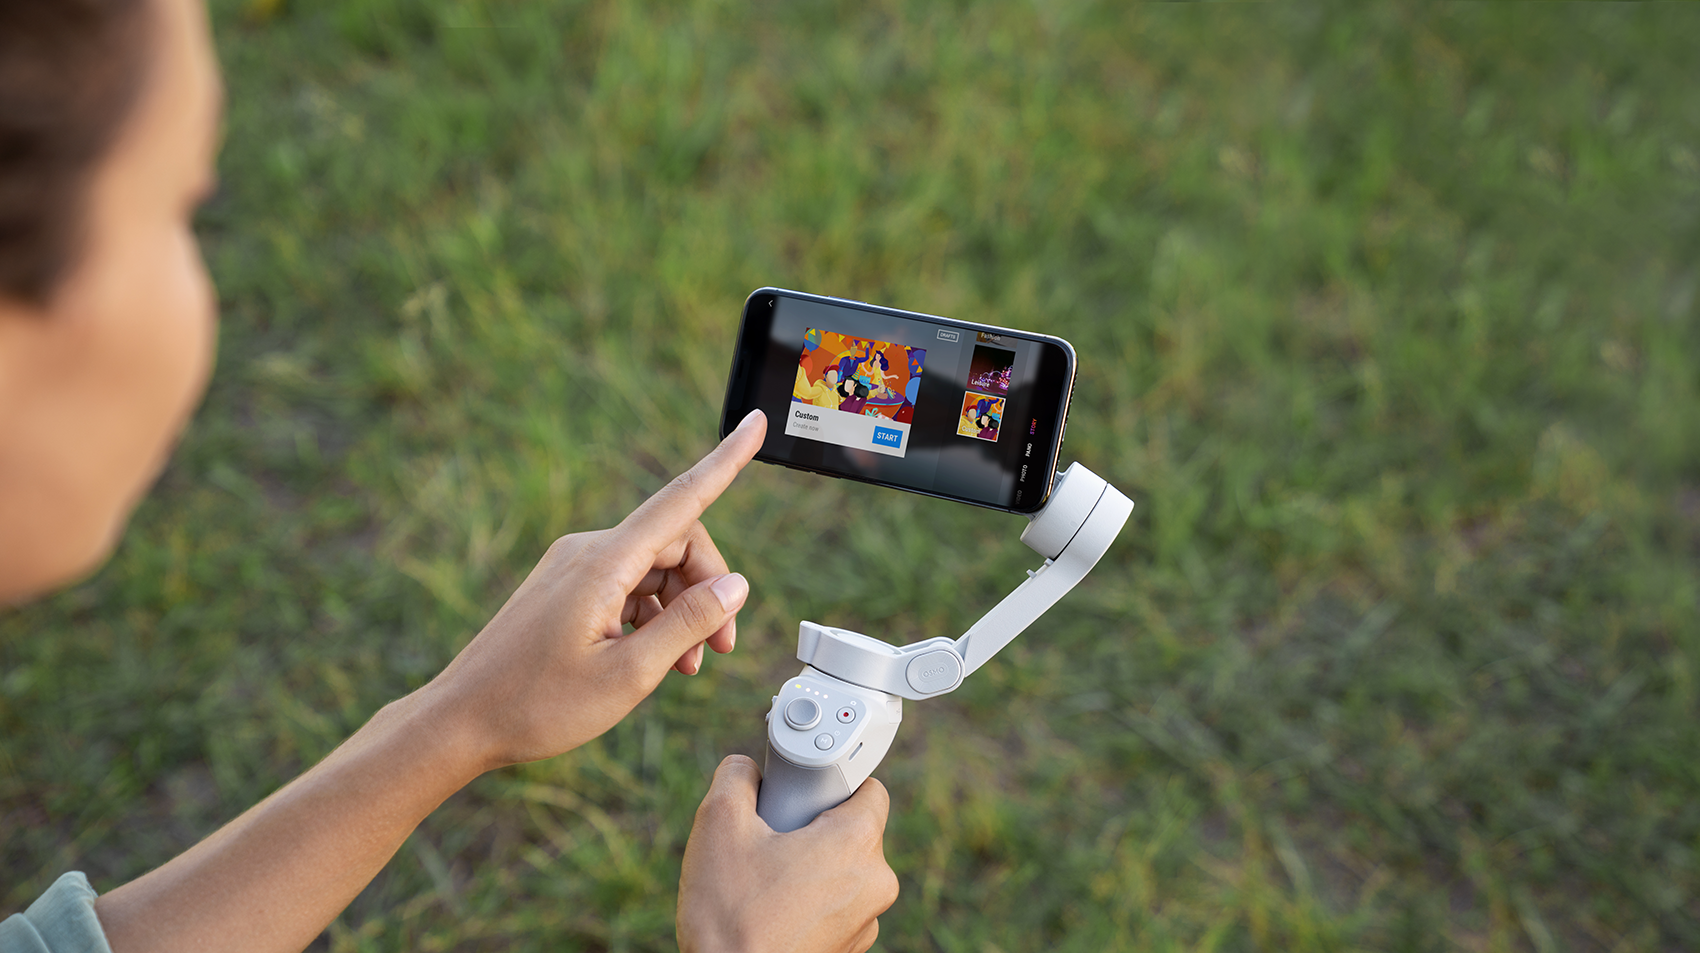 A woman using the DJI Mimo app with her finger